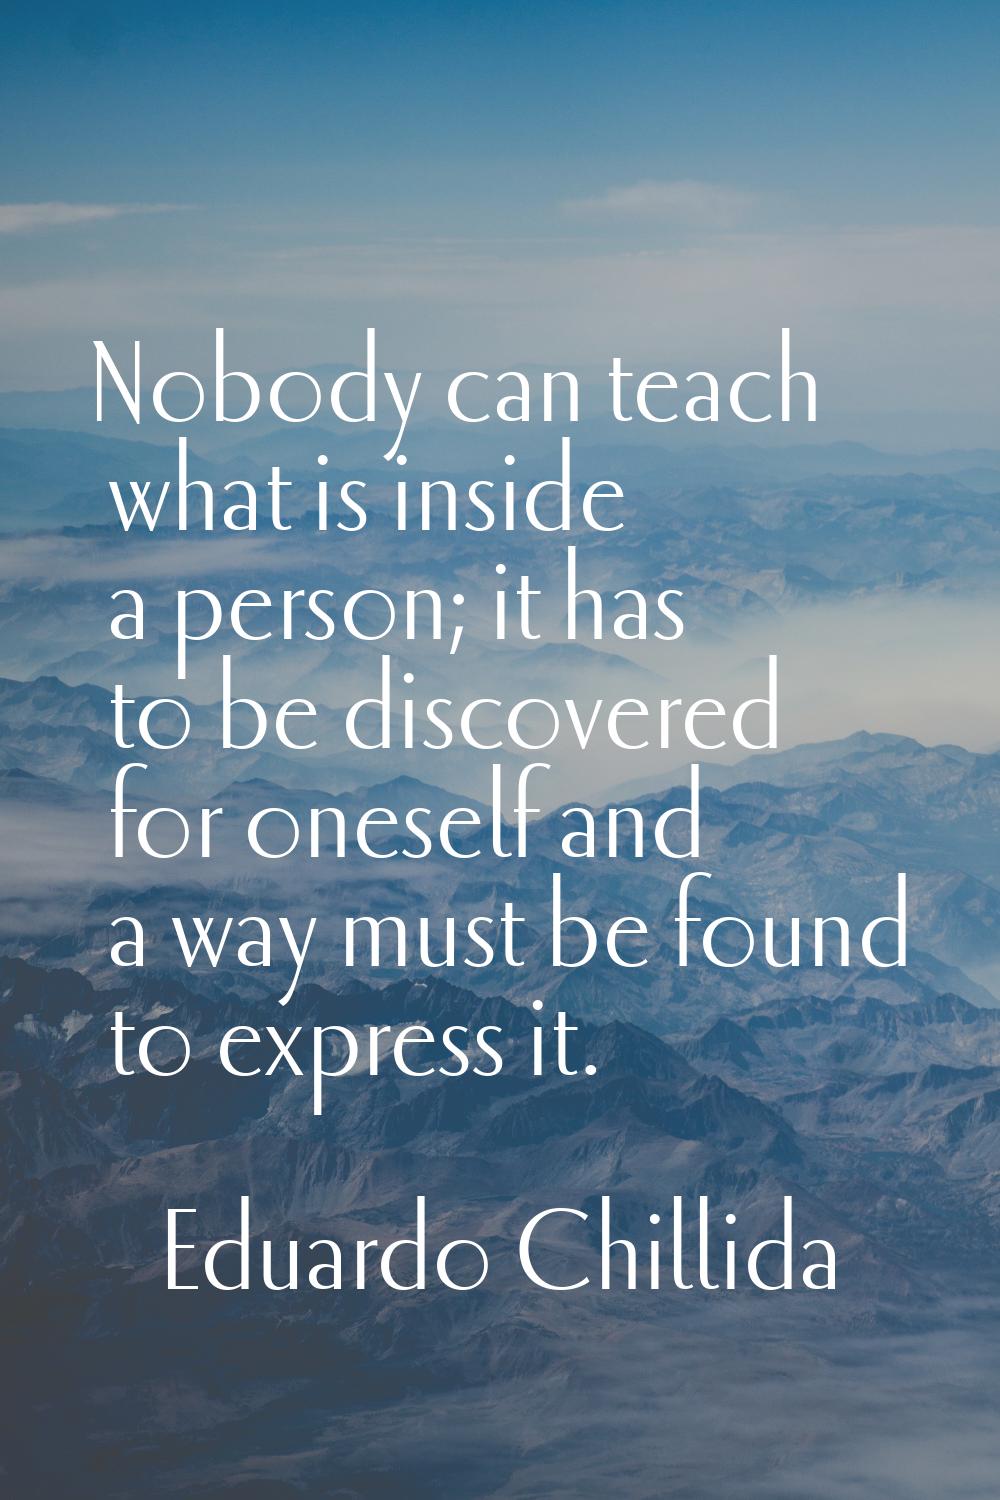 Nobody can teach what is inside a person; it has to be discovered for oneself and a way must be fou